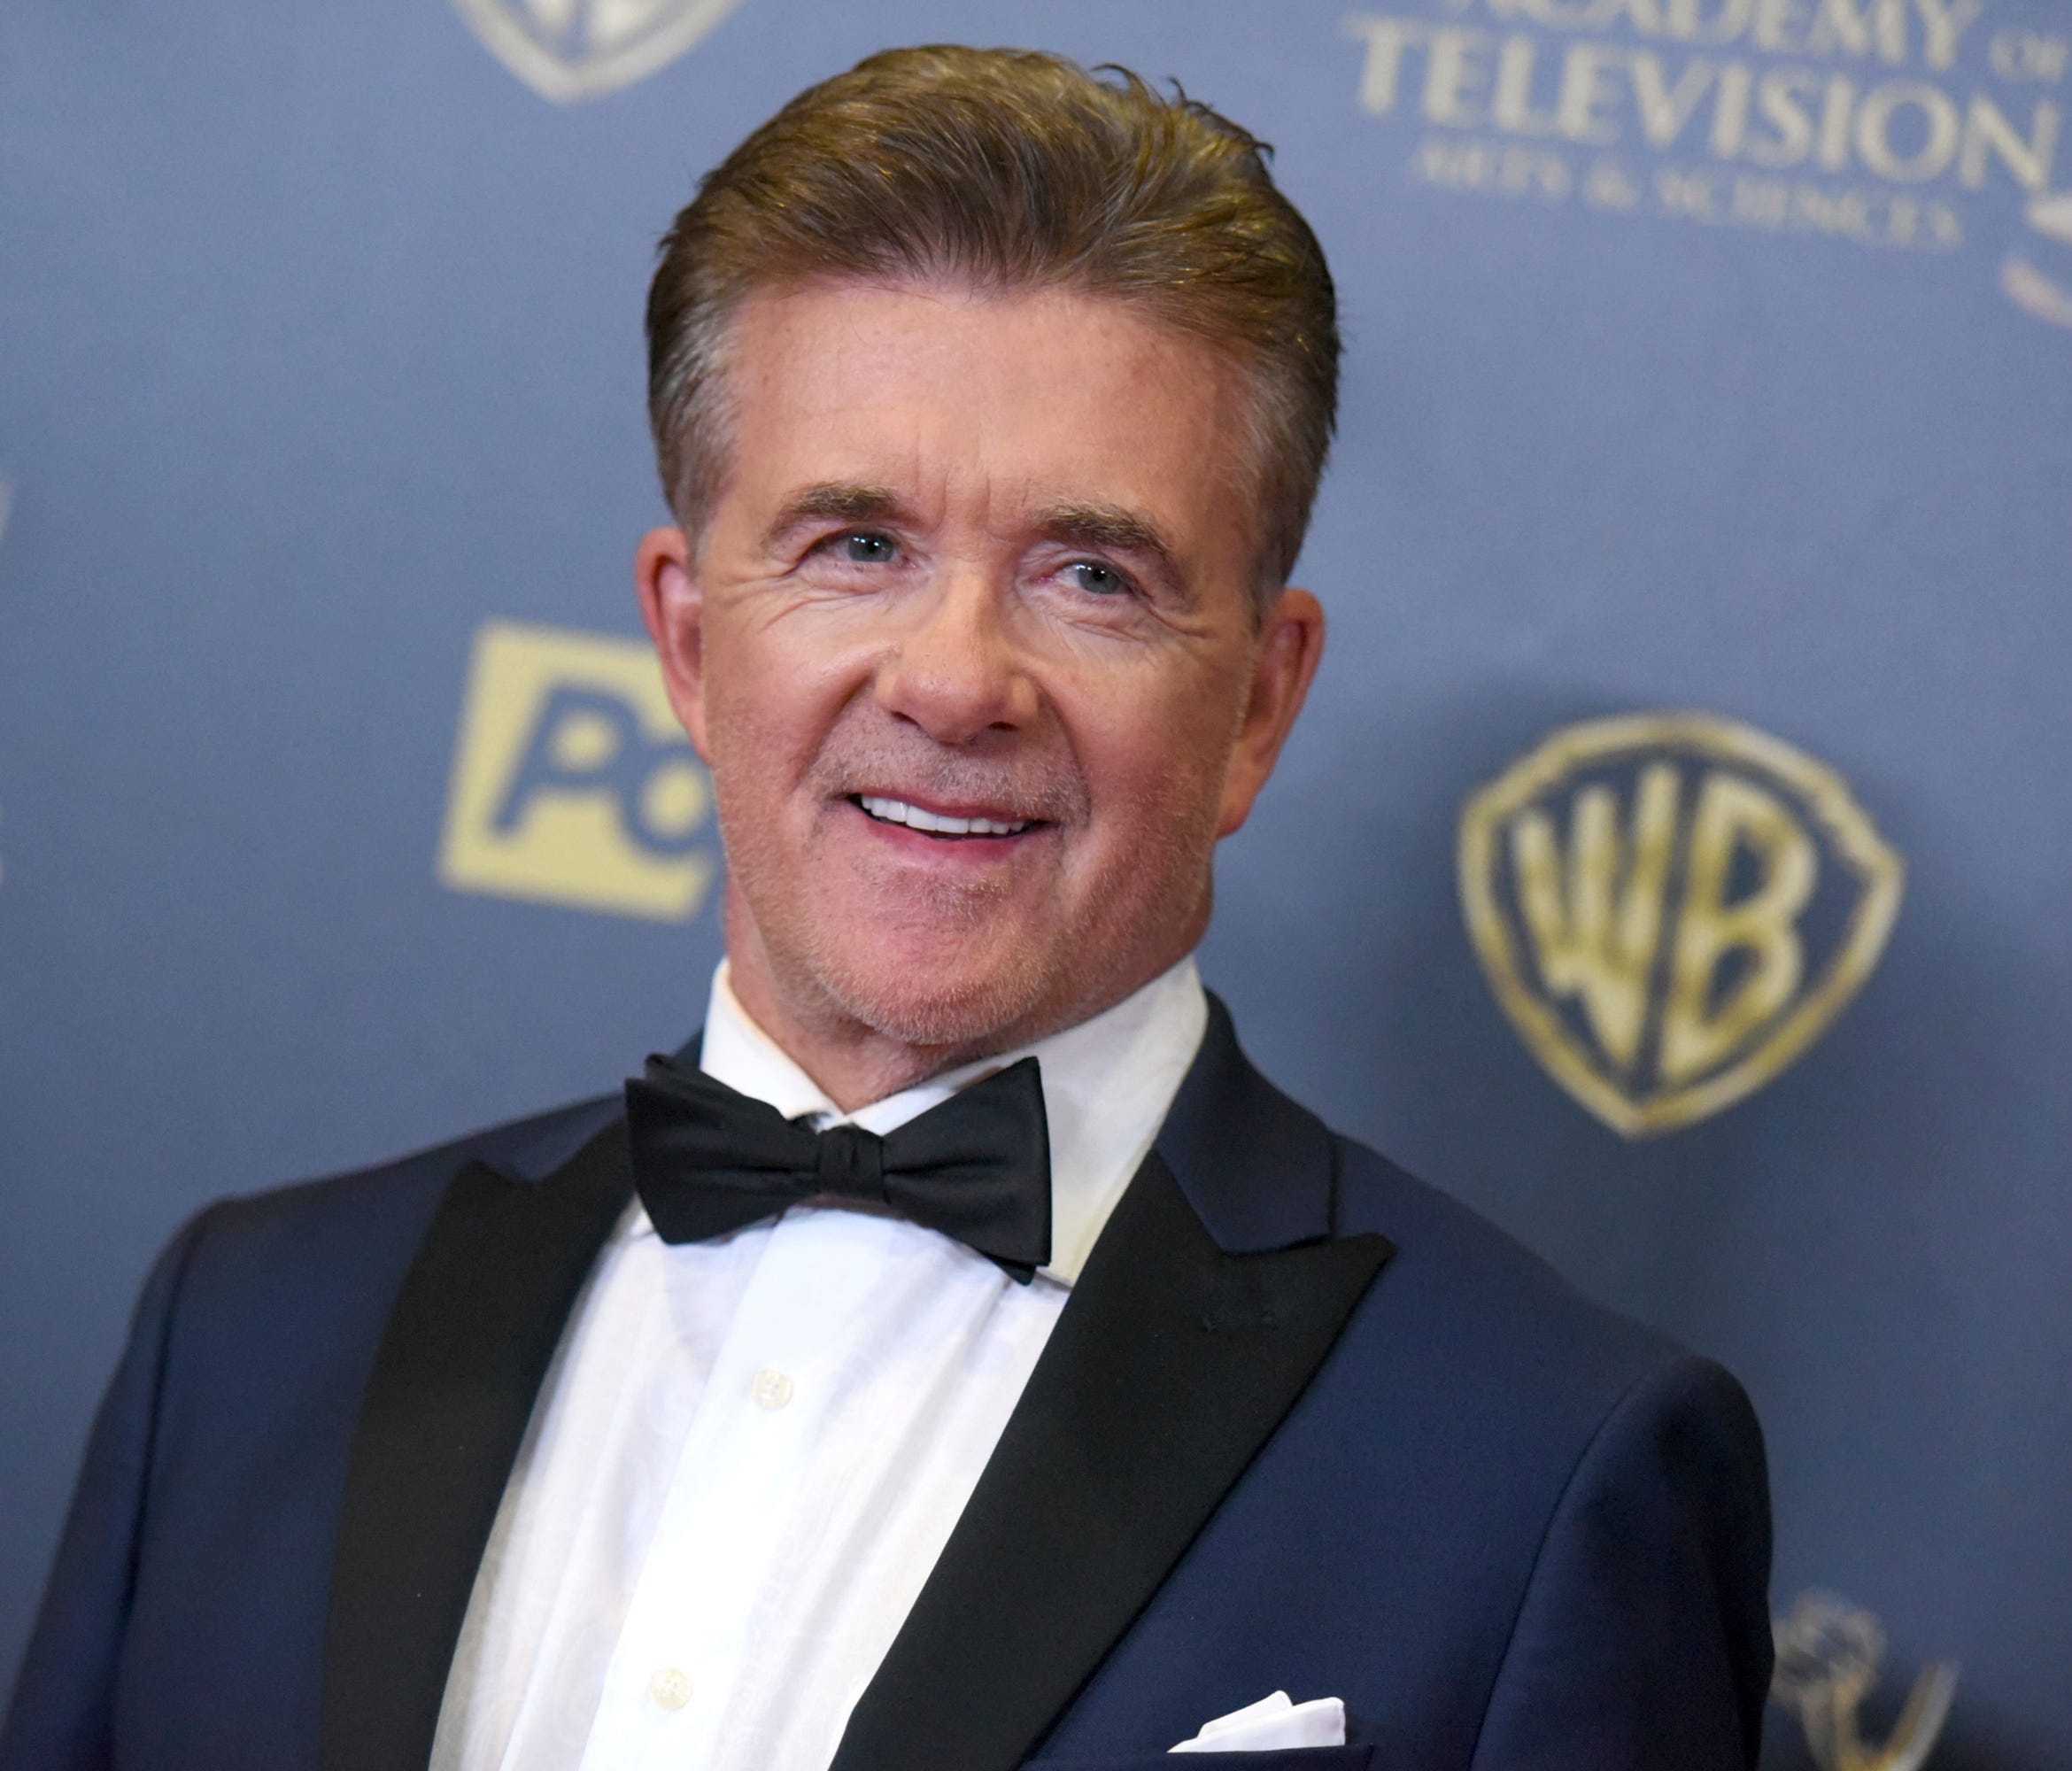 'Growing Pains' star Alan Thicke died of a ruptured aorta, his death certificate stated Wednesday.